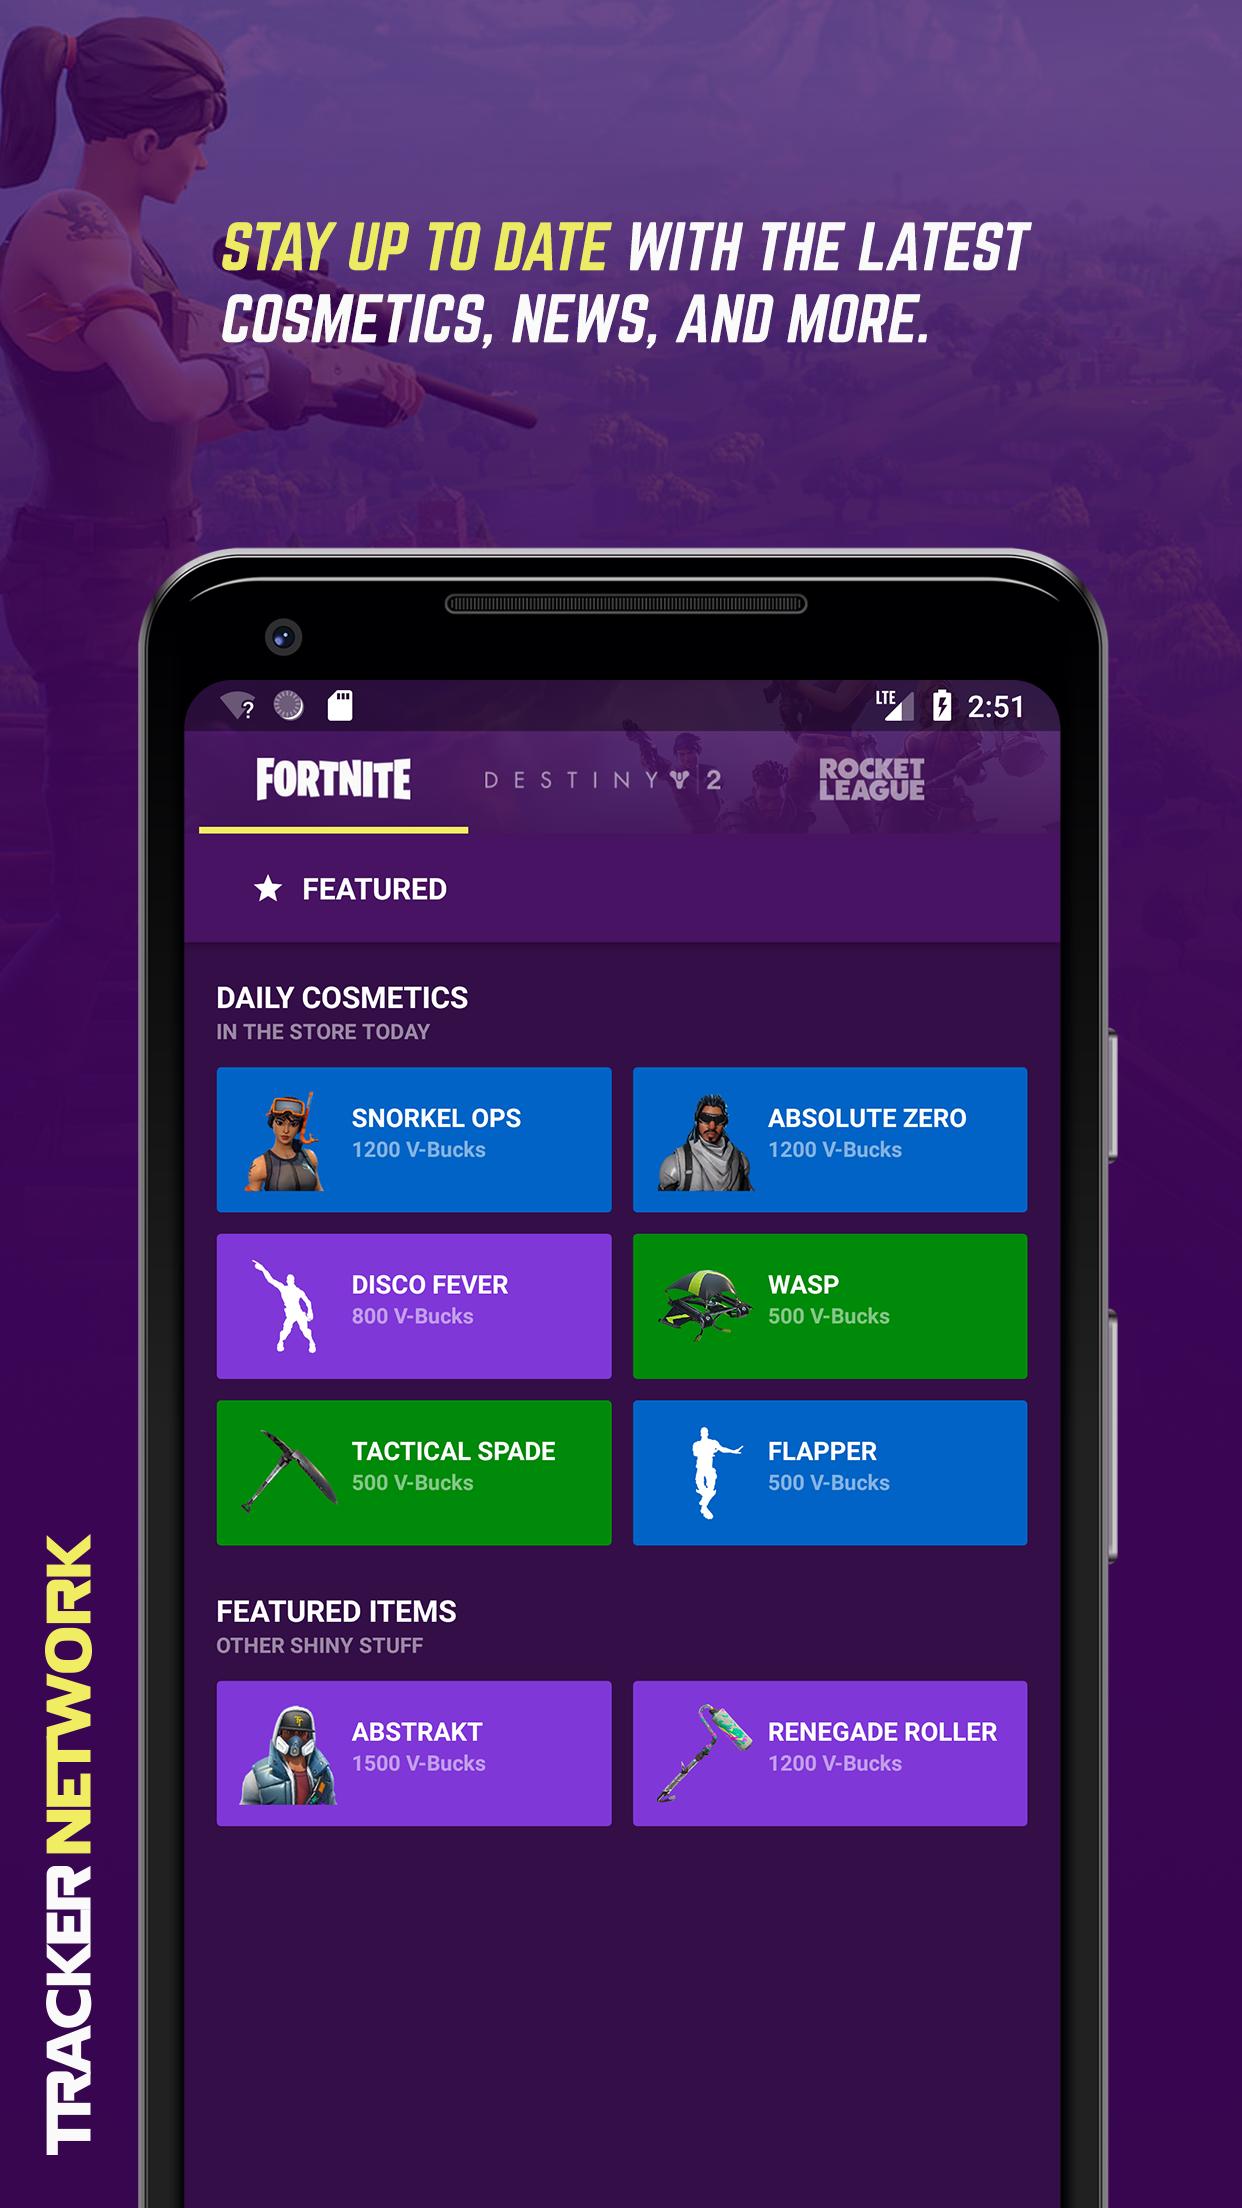 Fortnite Stats by Tracker Network for Android - APK Download